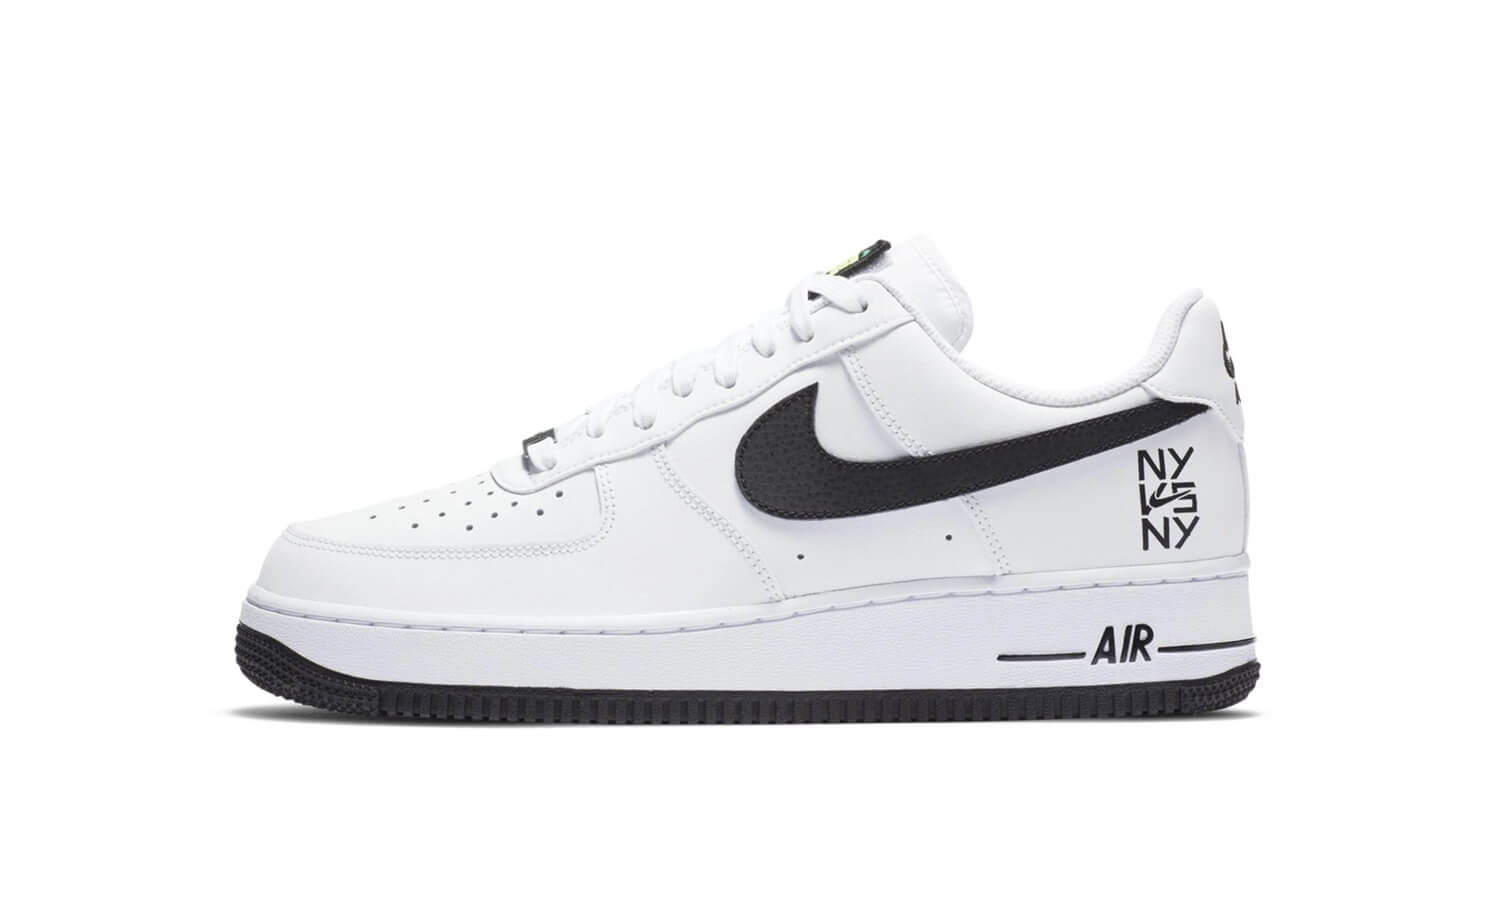 what the ny af1